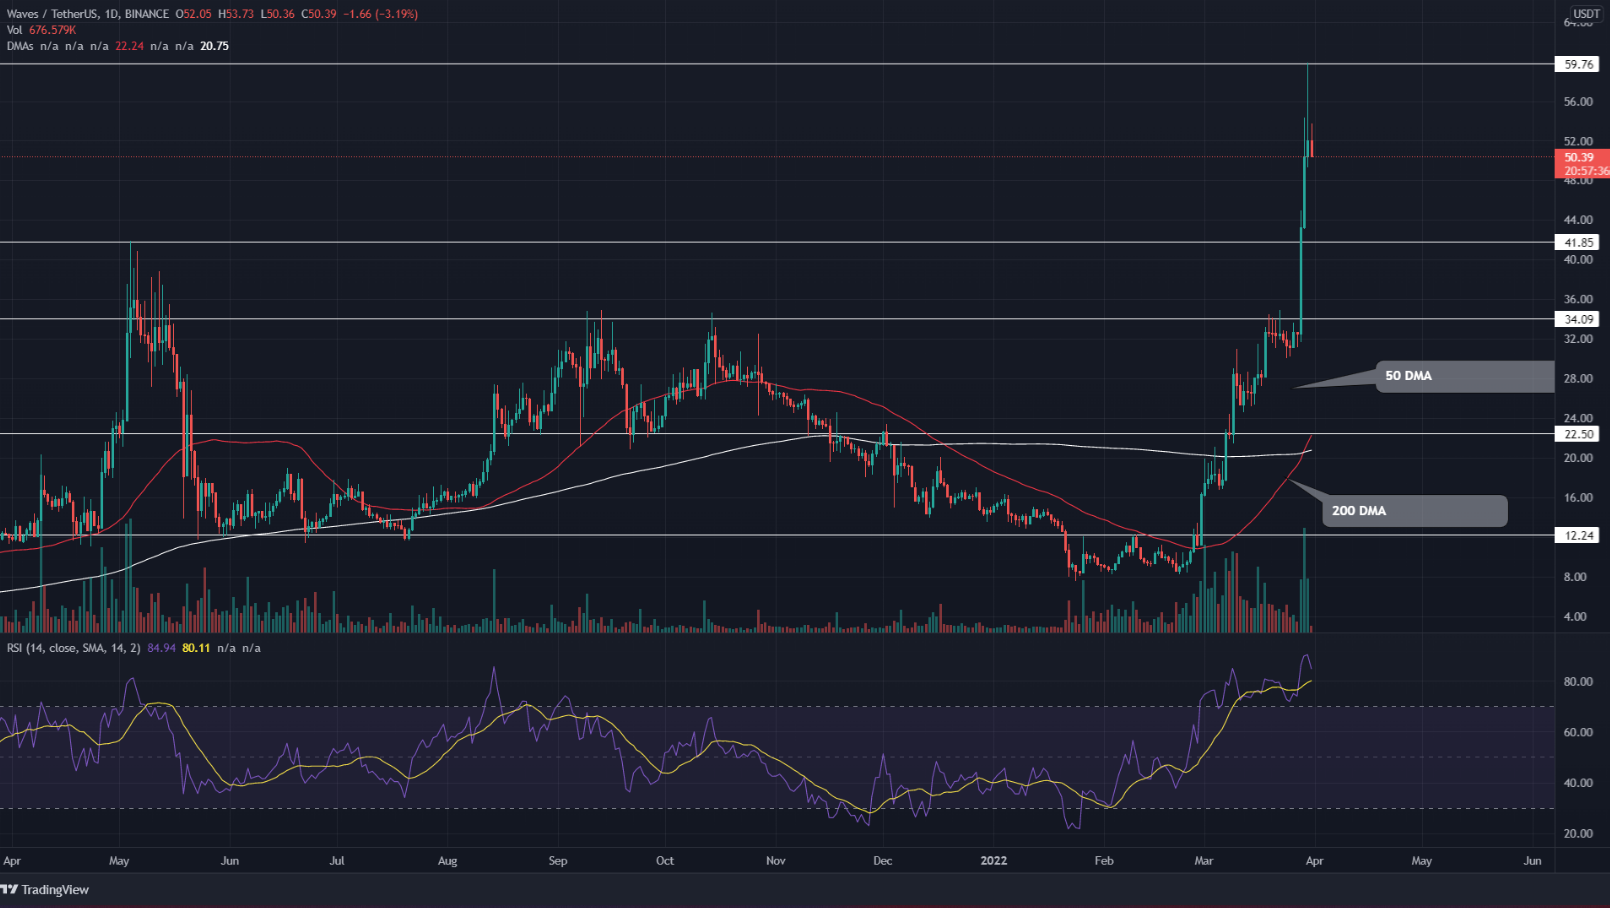 WAVES Price Indicate Pullback To $41.8 Support